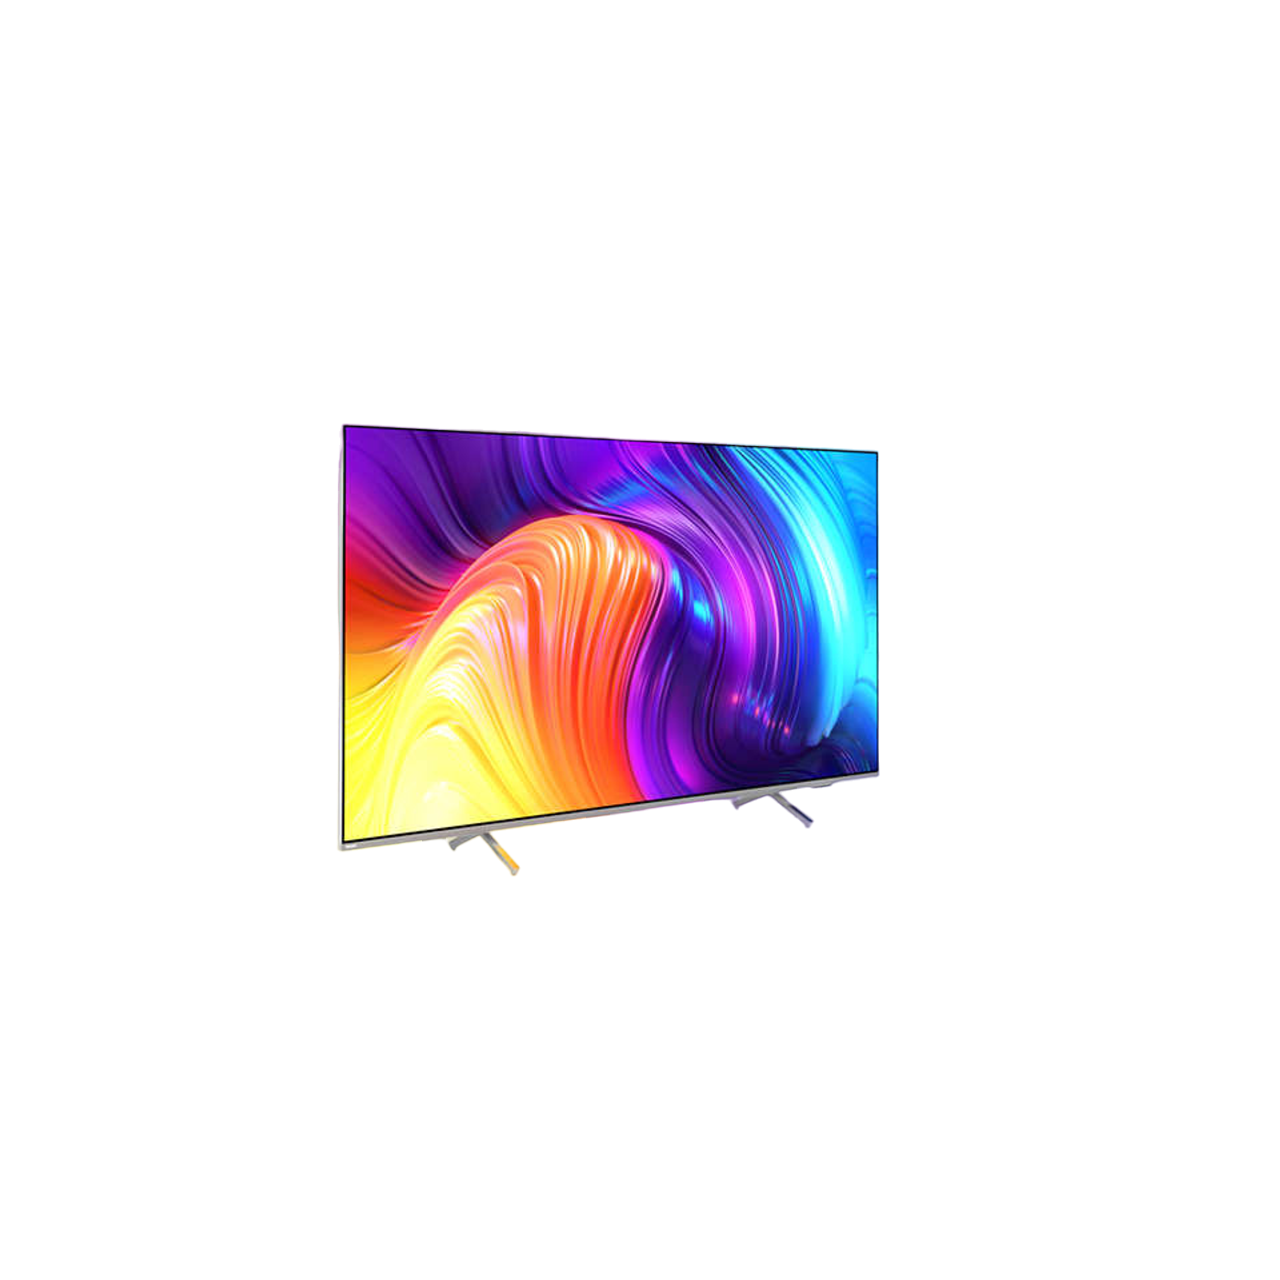 Zoll 4K, 43 TV PHILIPS 43 8507/12 Android Ambilight, PUS 109,22 / (Flat, 11 (R)) LED UHD cm, TV™